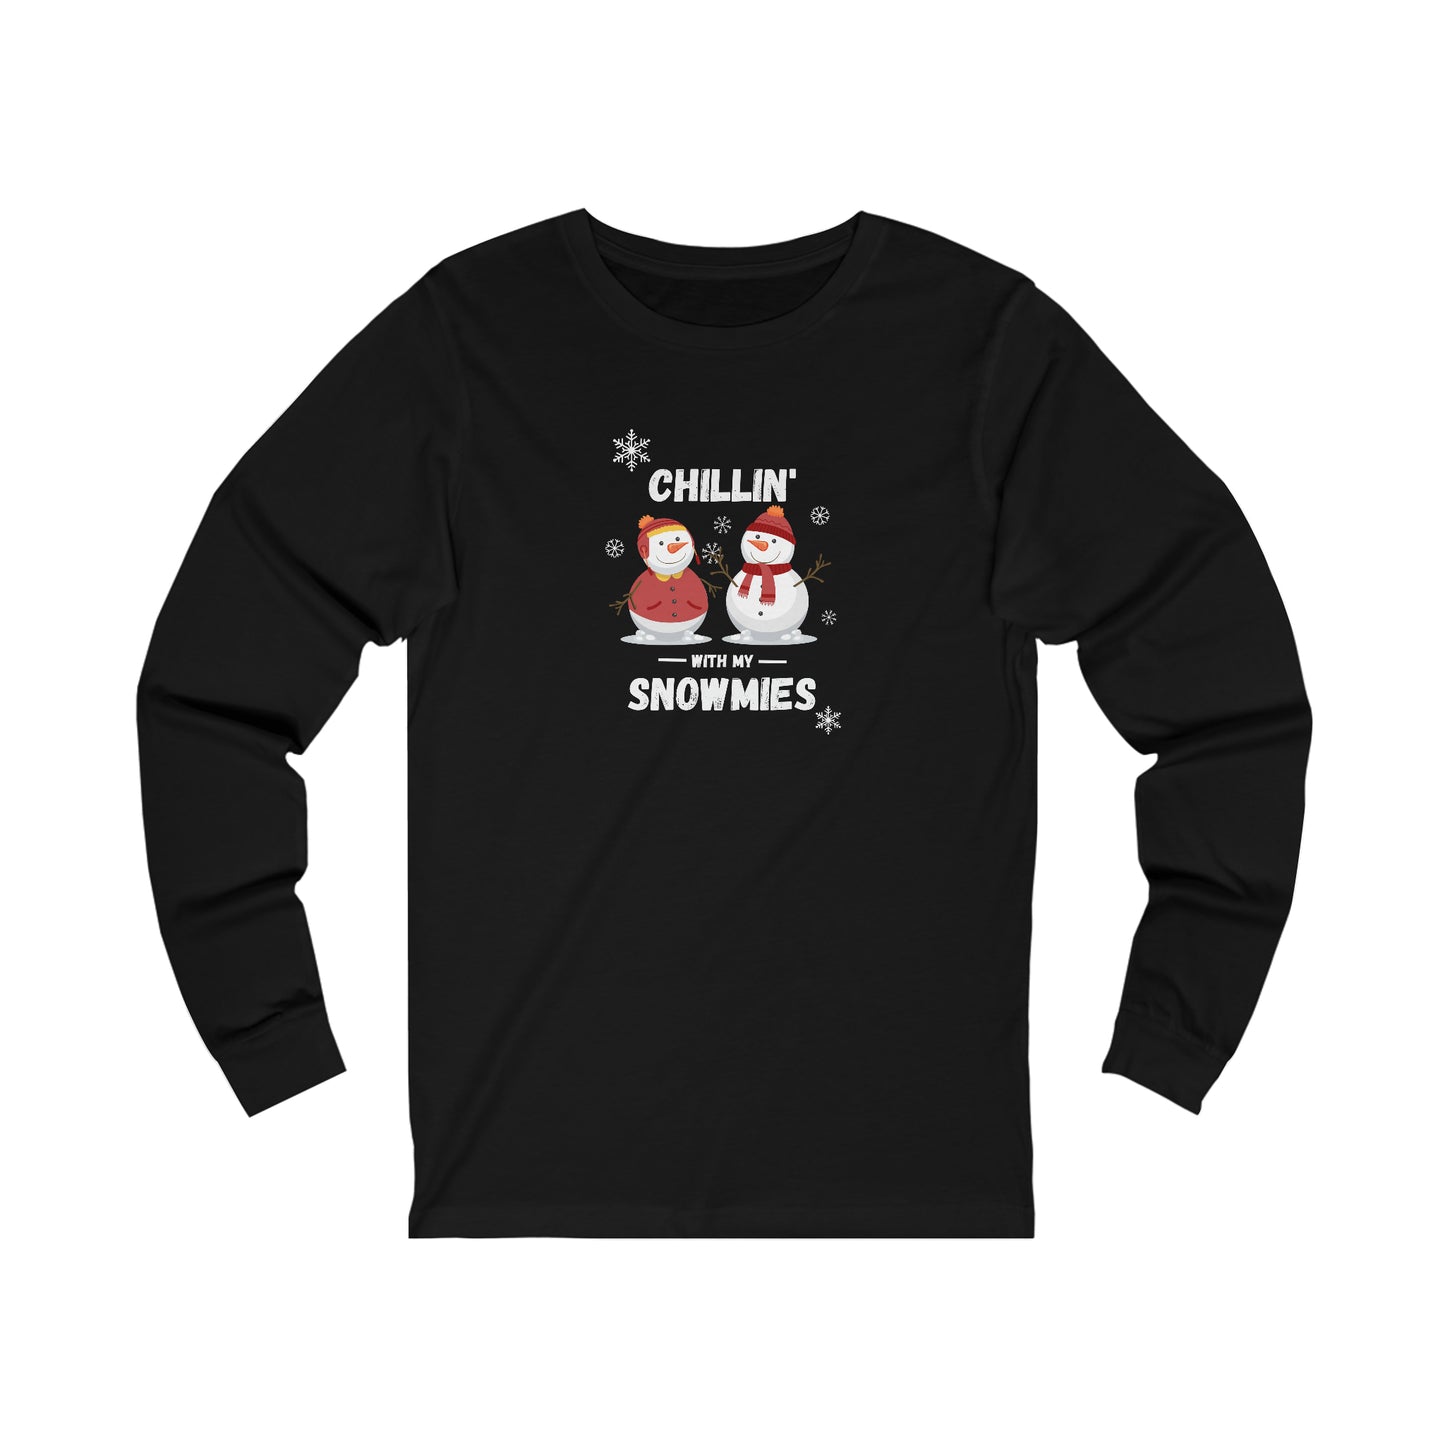 Chillin' with My Snowmies Unisex Jersey Long Sleeve Tee